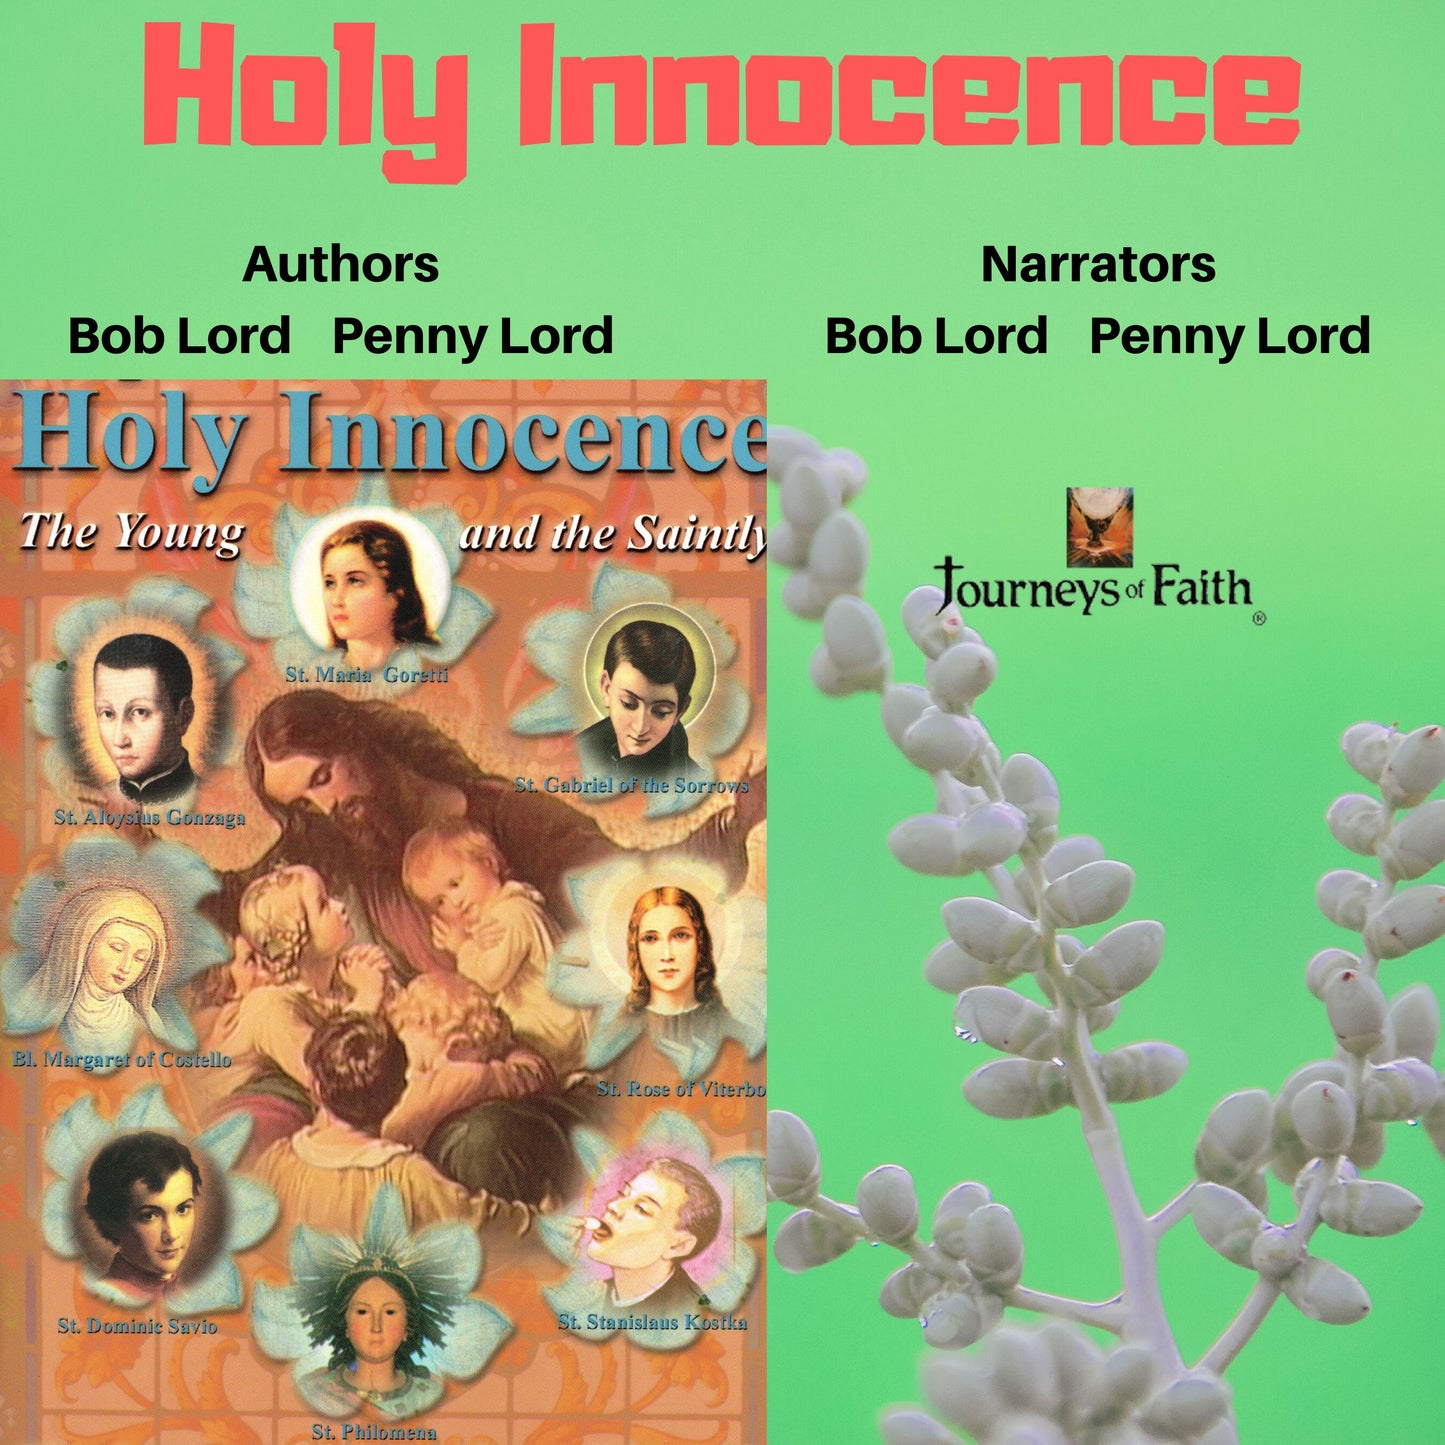 Holy Innocence Audiobook - Bob and Penny Lord